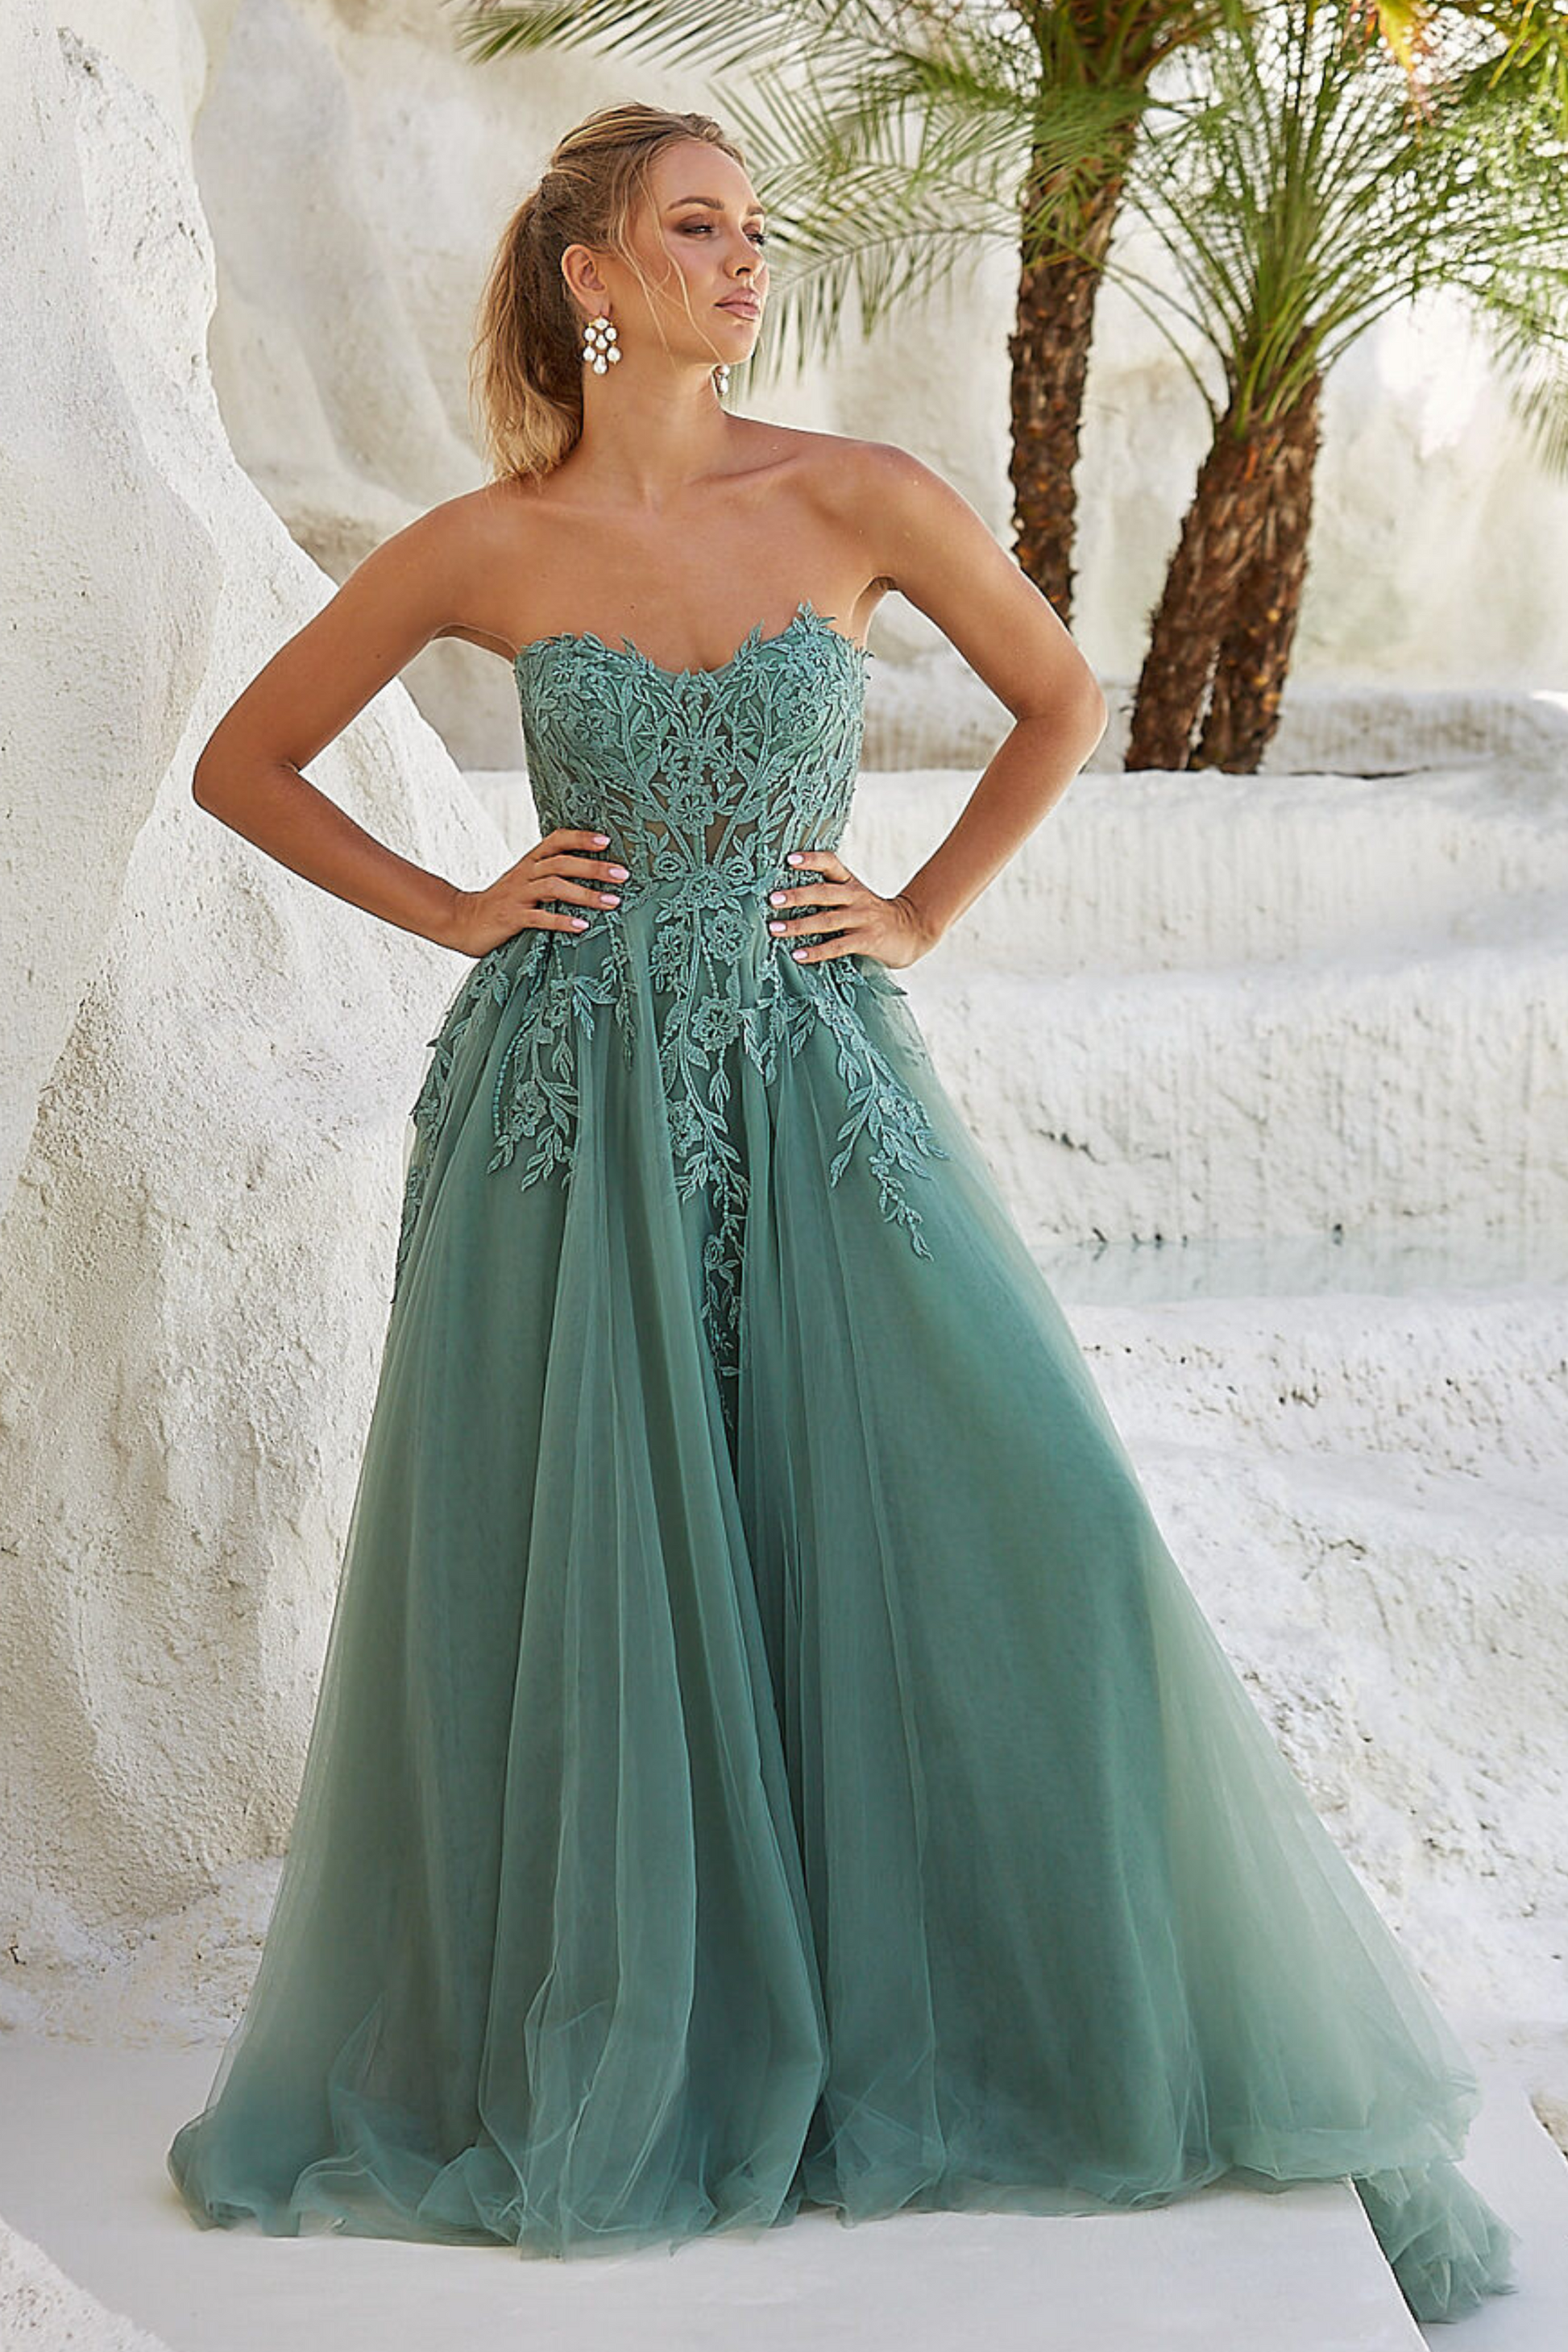 Tania Olsen a- line formal dress in sage tulle and lace ballgown